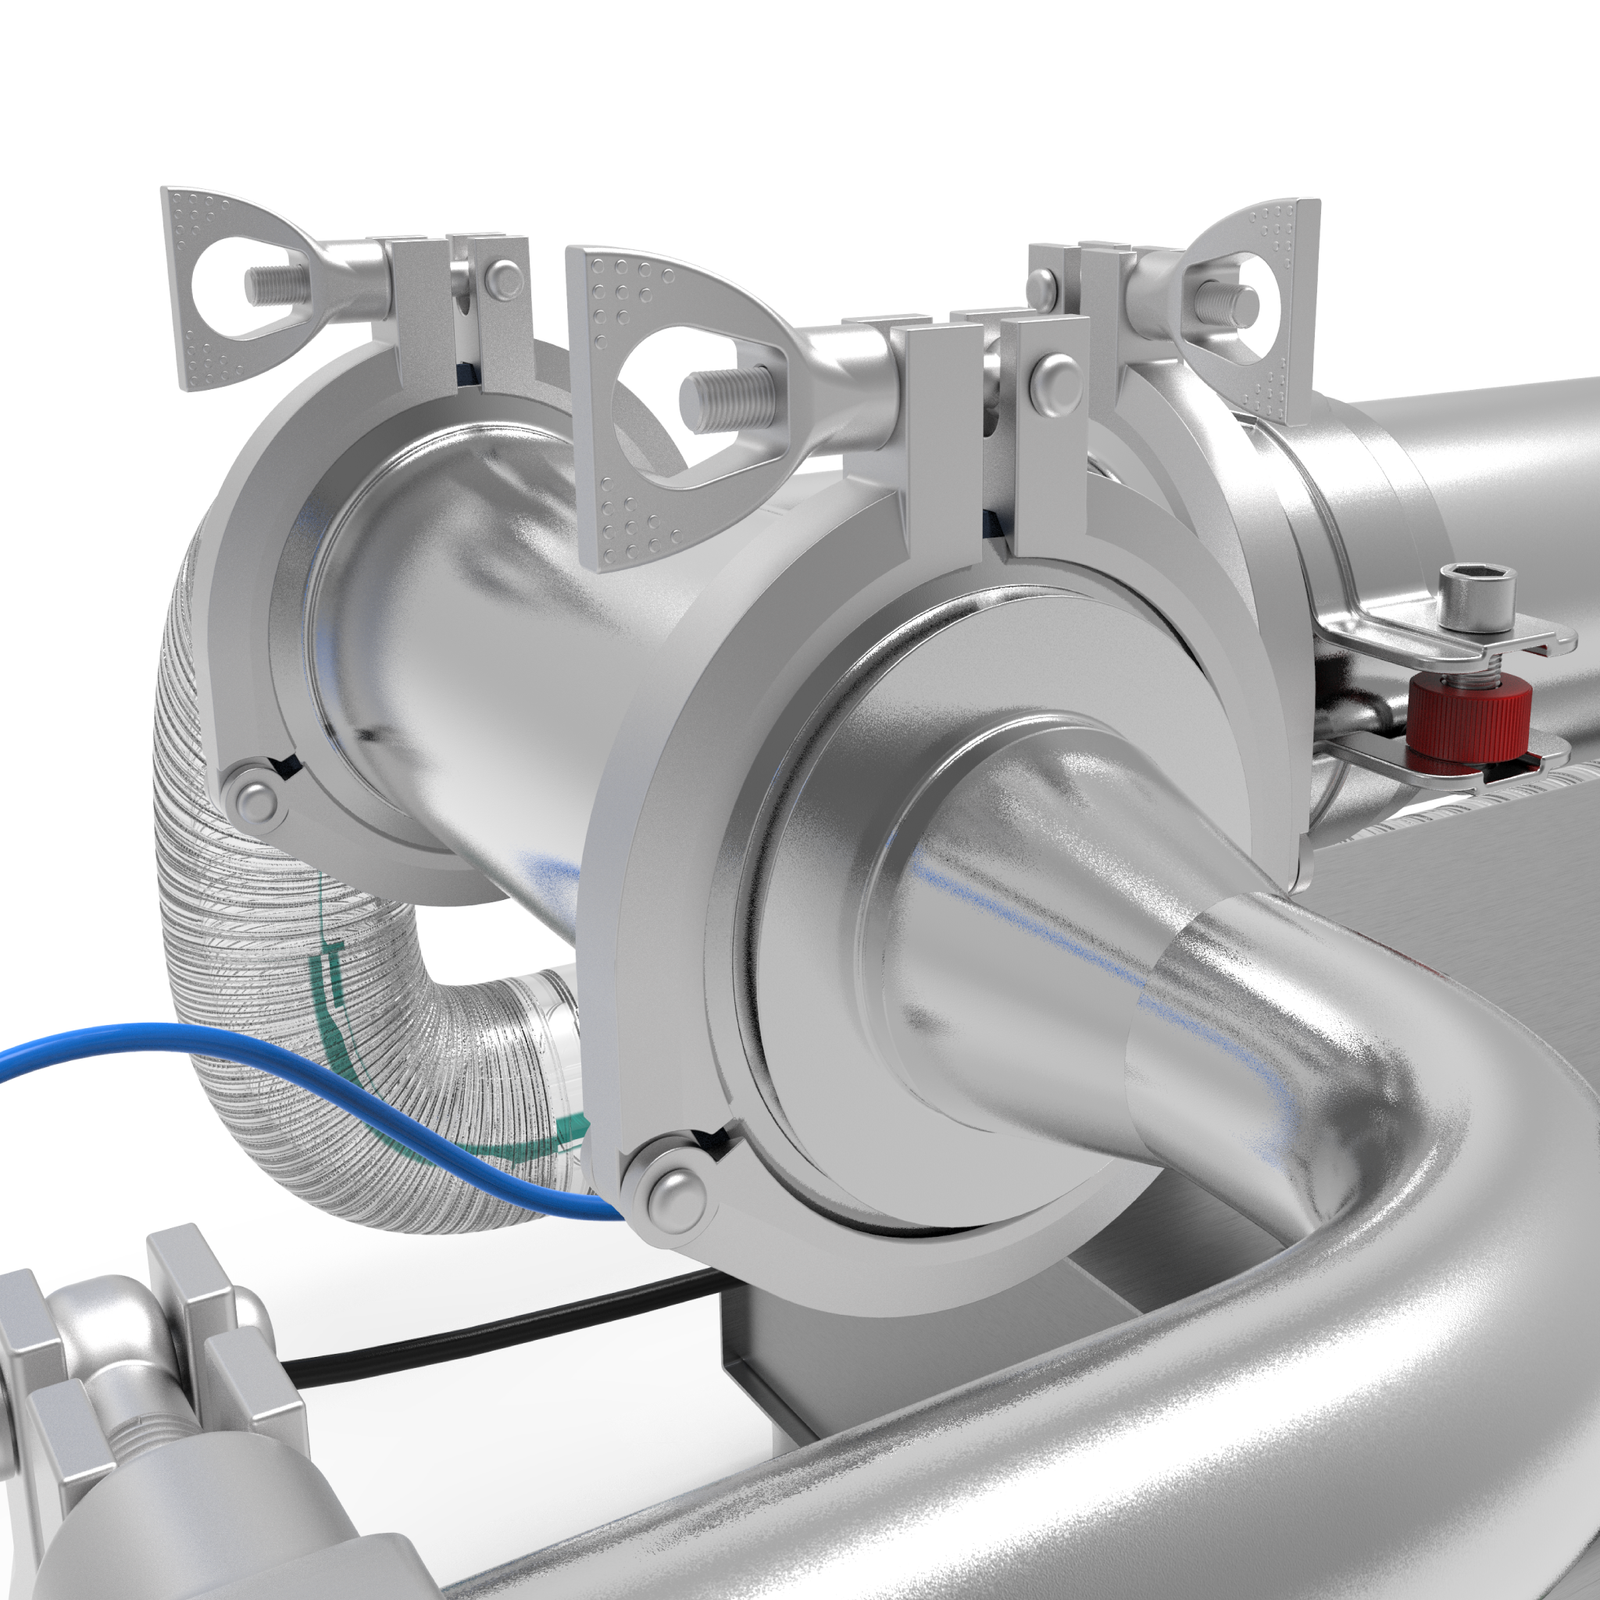 Closeup of the tri clamps and main input hose of the JORES TECHNOLOGIES® Piston filler